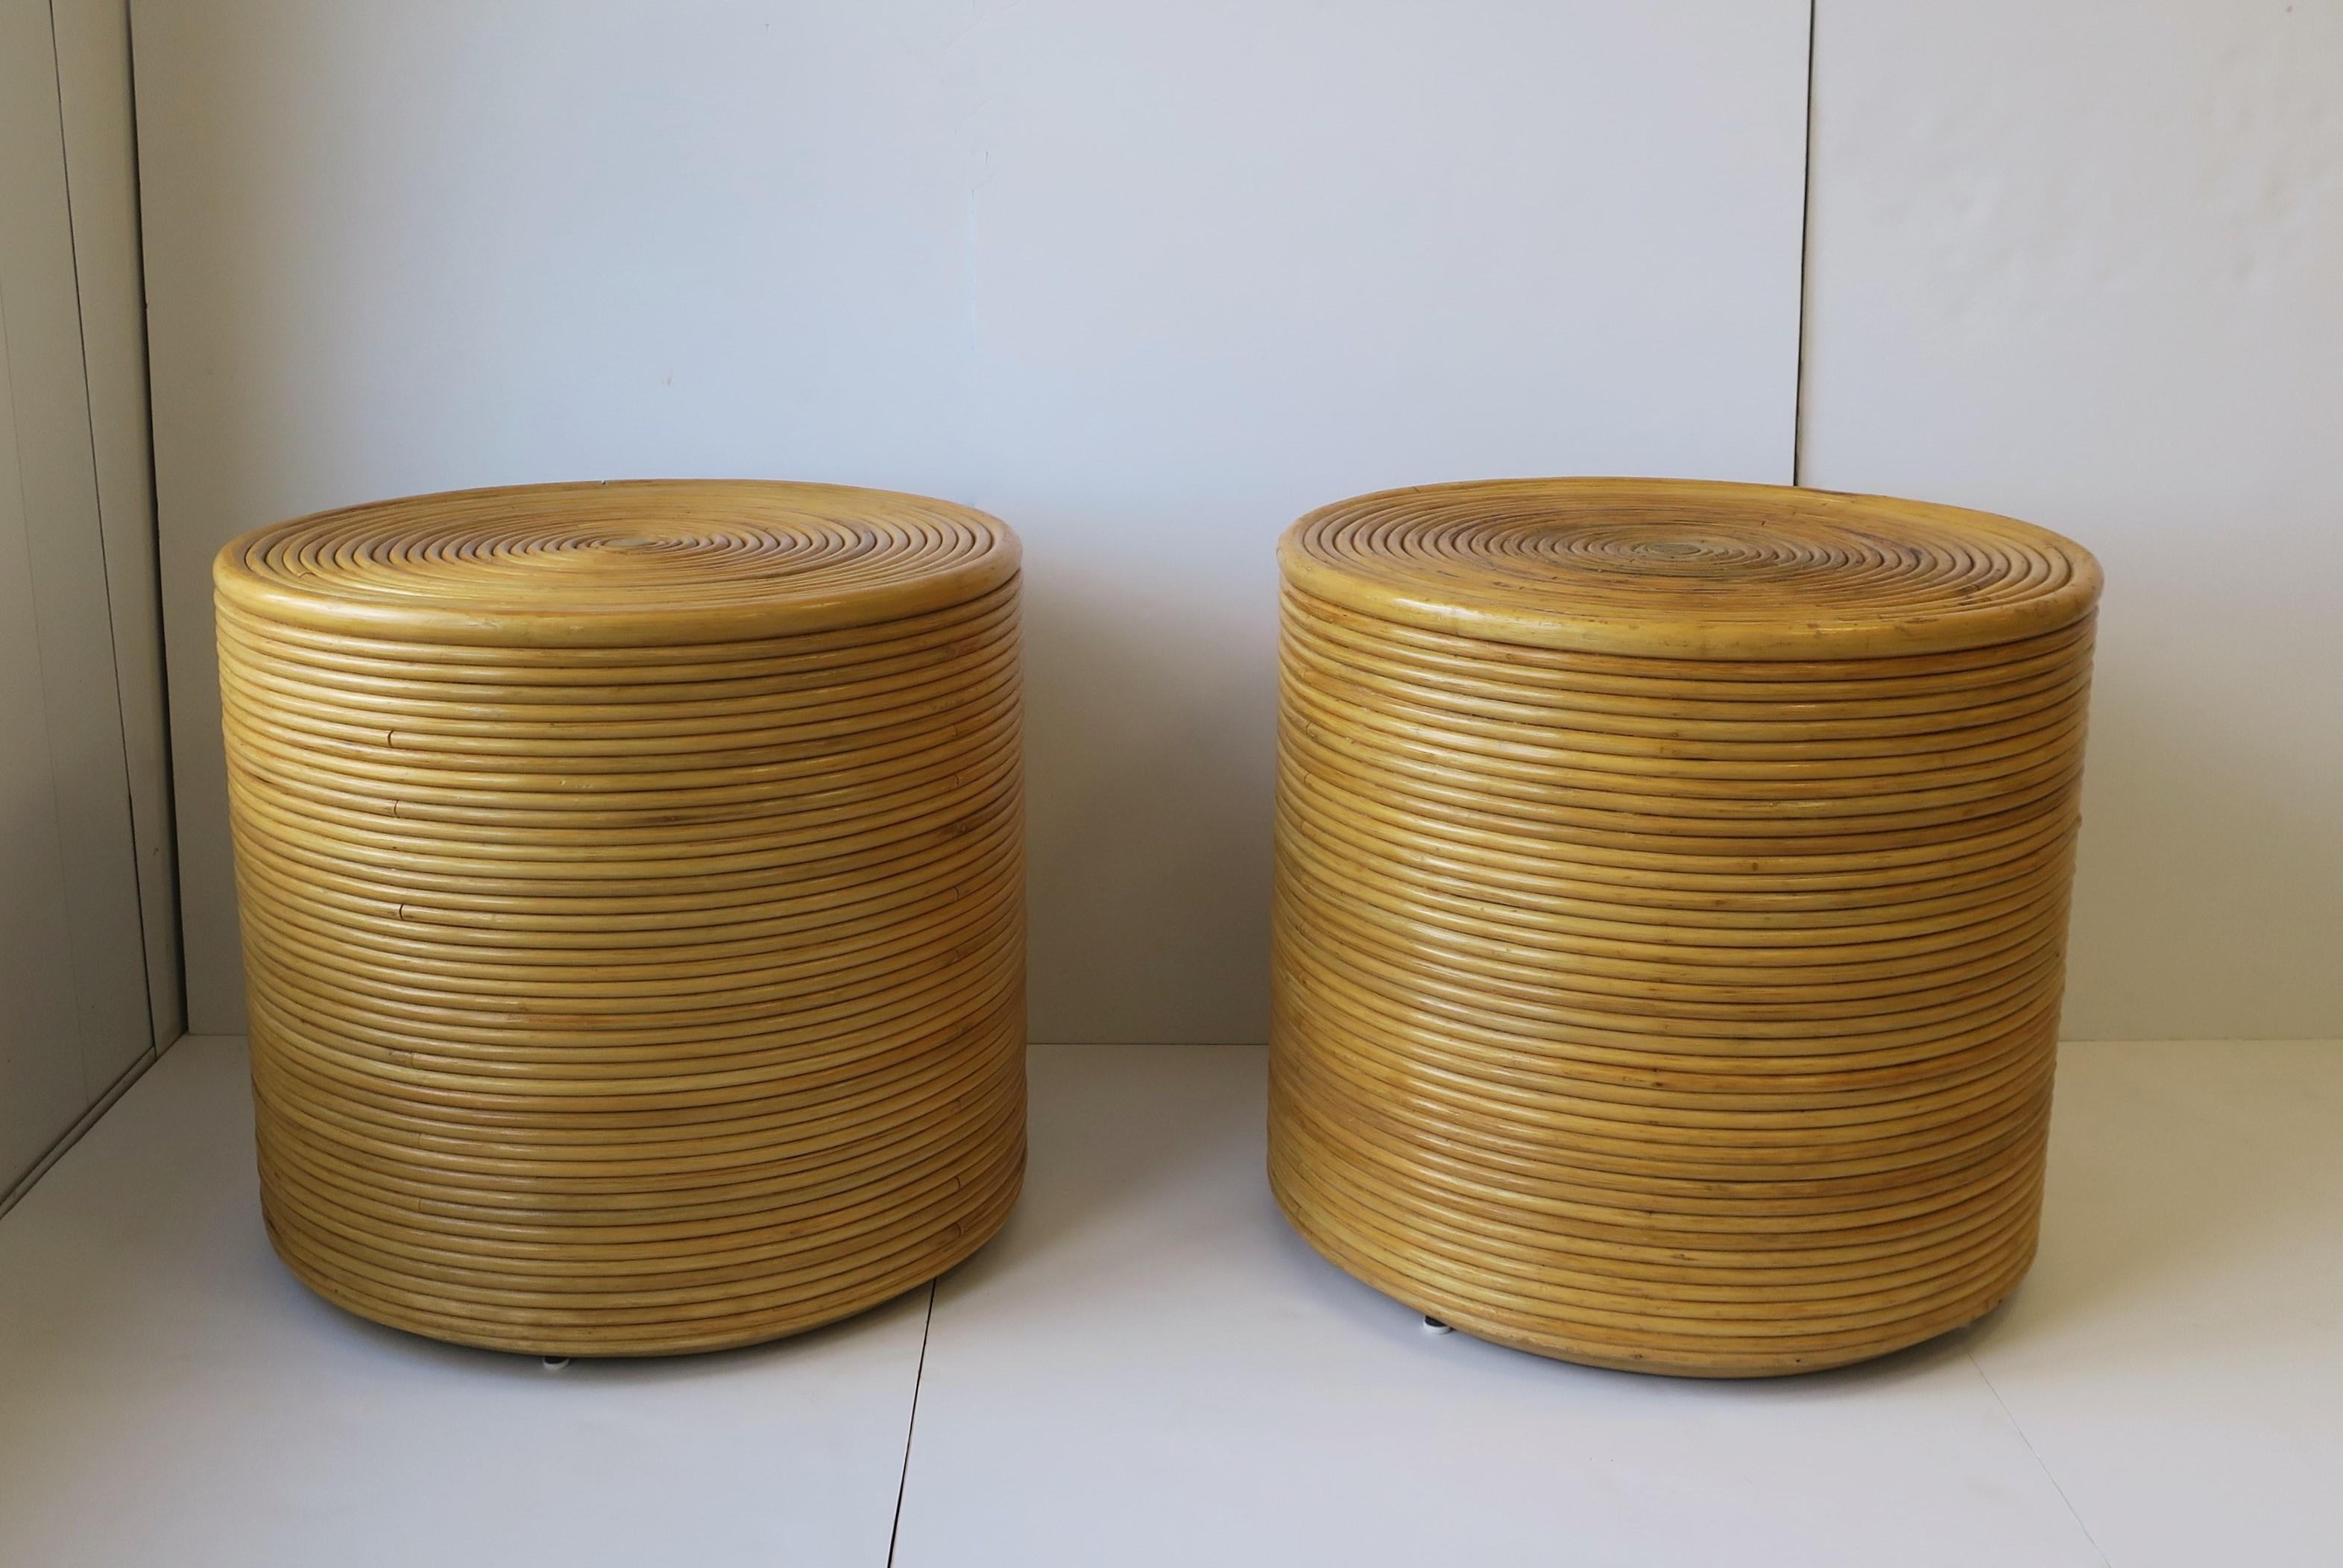 A great pair of bent rattan end tables with smoked glass tops, in the style of McGuire furniture, circa late-20th century. These round tables can be used with or without smoked glass tops as shown in images. 

Dimensions: 24.25